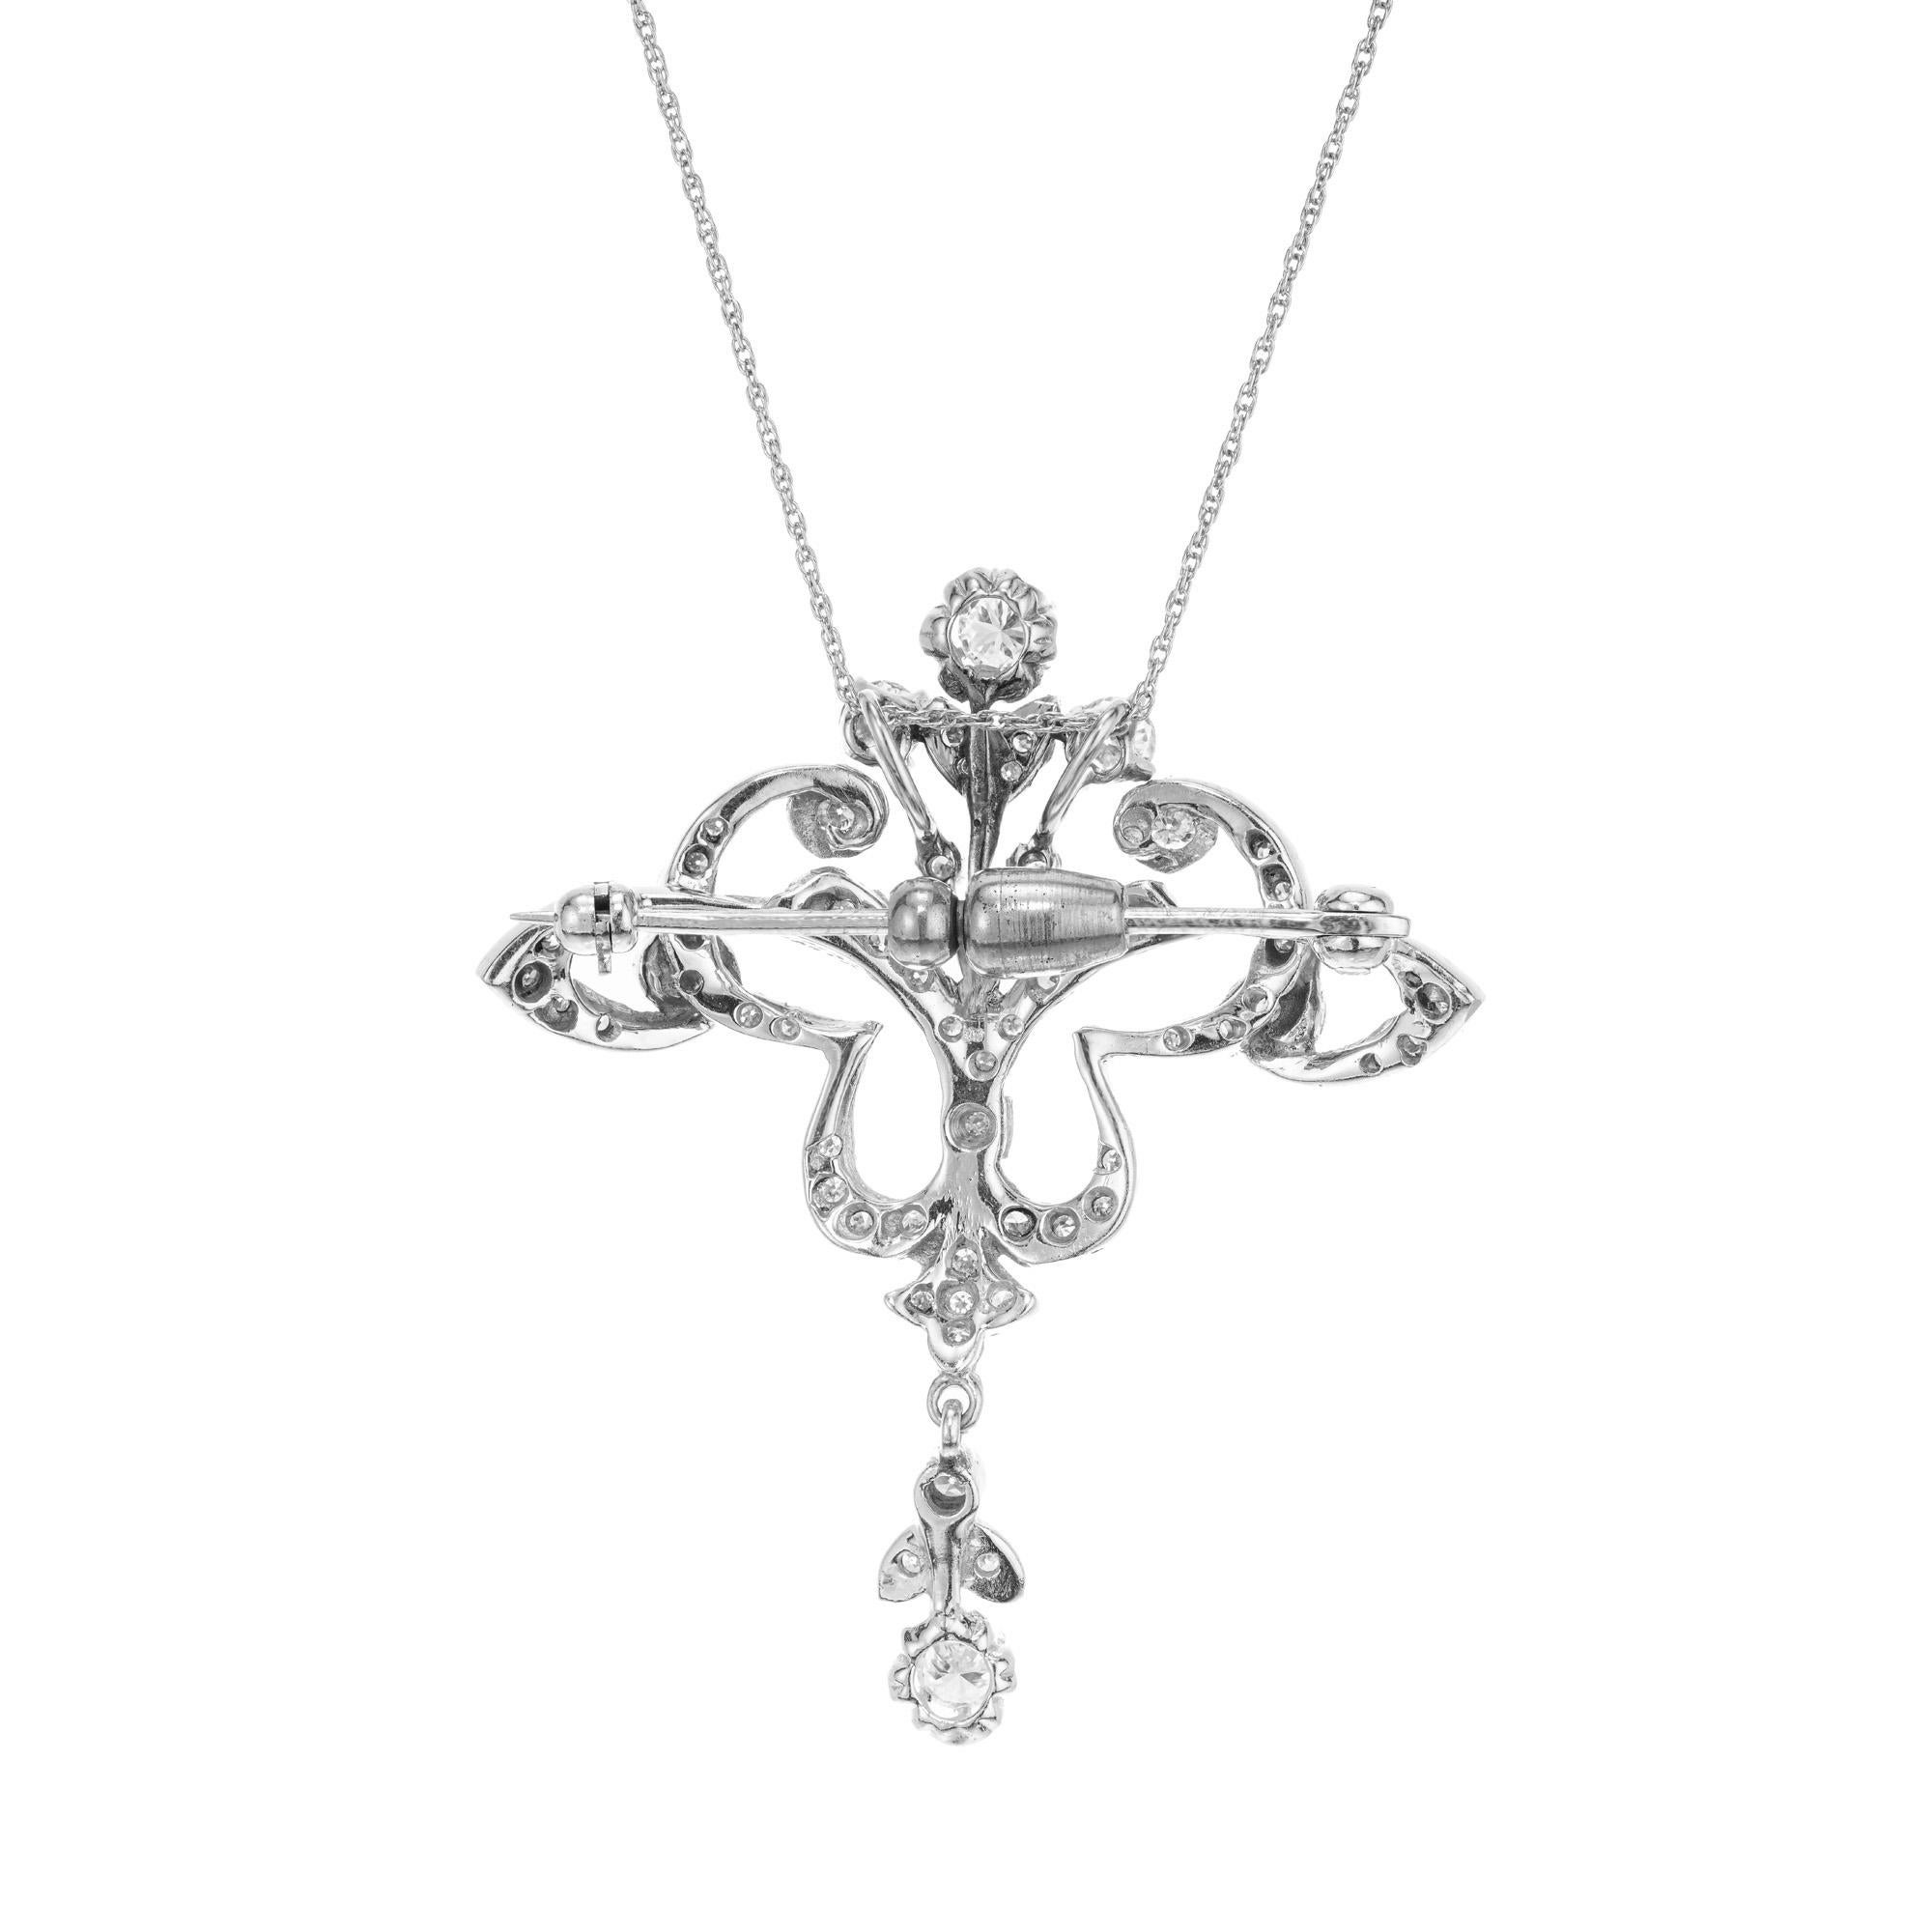 Stunning 1940's diamond pendant. Adorned with 58 round mixed diamonds. Can be worn at a pendant or a brooch. Constructed out of 14k white gold, this highly detailed and open work pendant is a perfect example of Art Deco era.  open work.

58 round